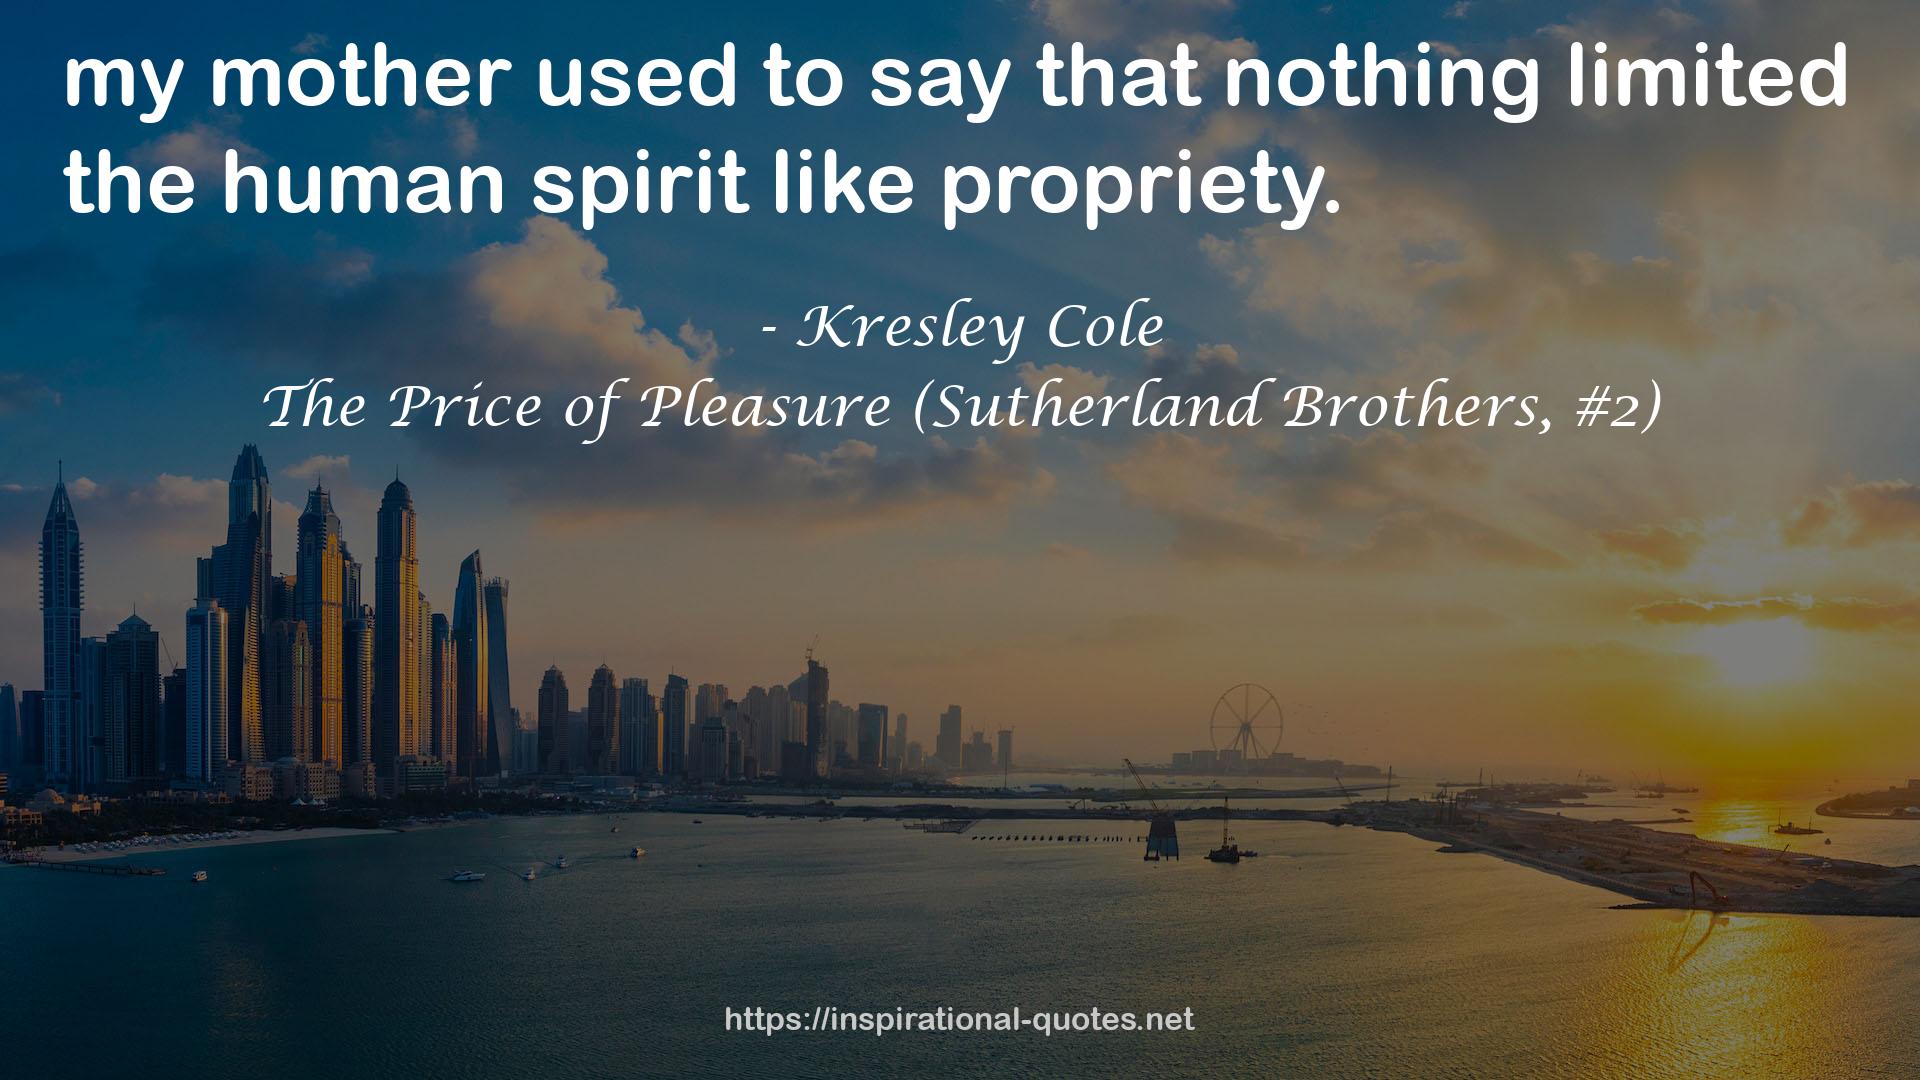 The Price of Pleasure (Sutherland Brothers, #2) QUOTES